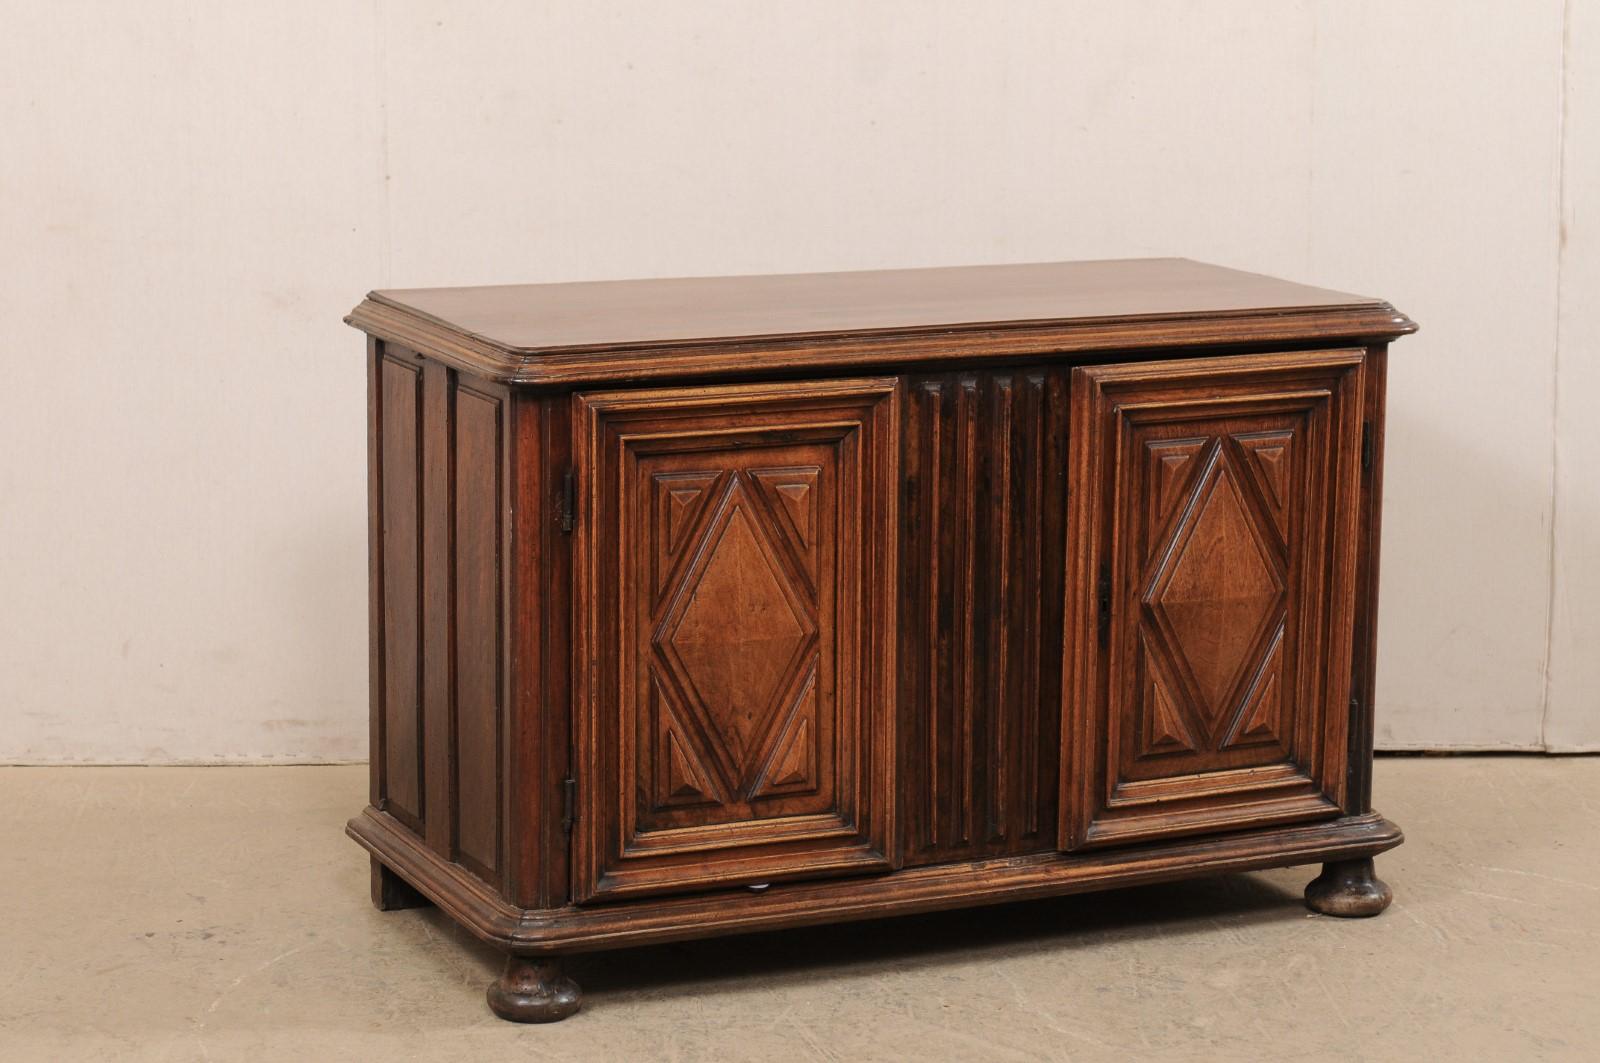 A French decoratively carved wood buffet cabinet from the early 19th century. This antique cabinet from France features a rectangular-shaped top with molded edging and curved front corners, and artfully adorn with thick reed carvings at front